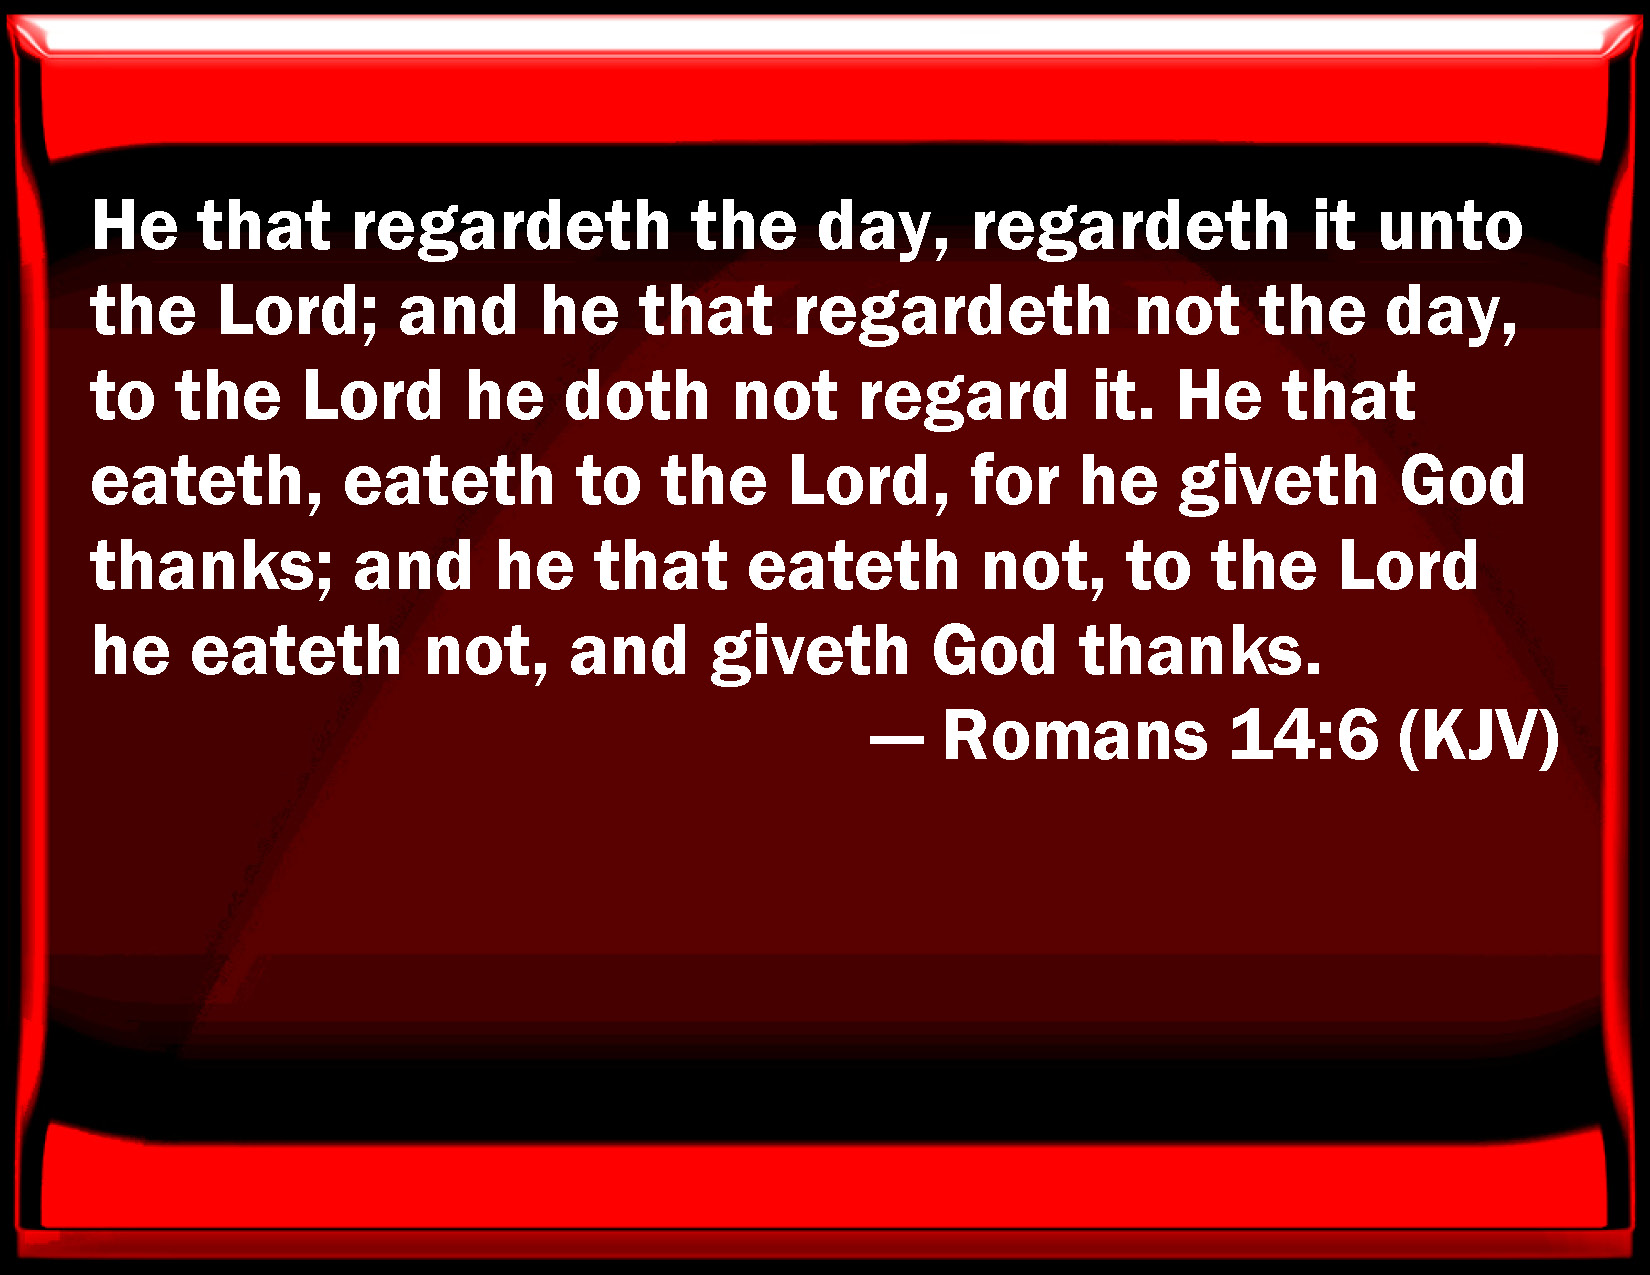 romans-14-6-he-that-regards-the-day-regards-it-to-the-lord-and-he-that-regards-not-the-day-to